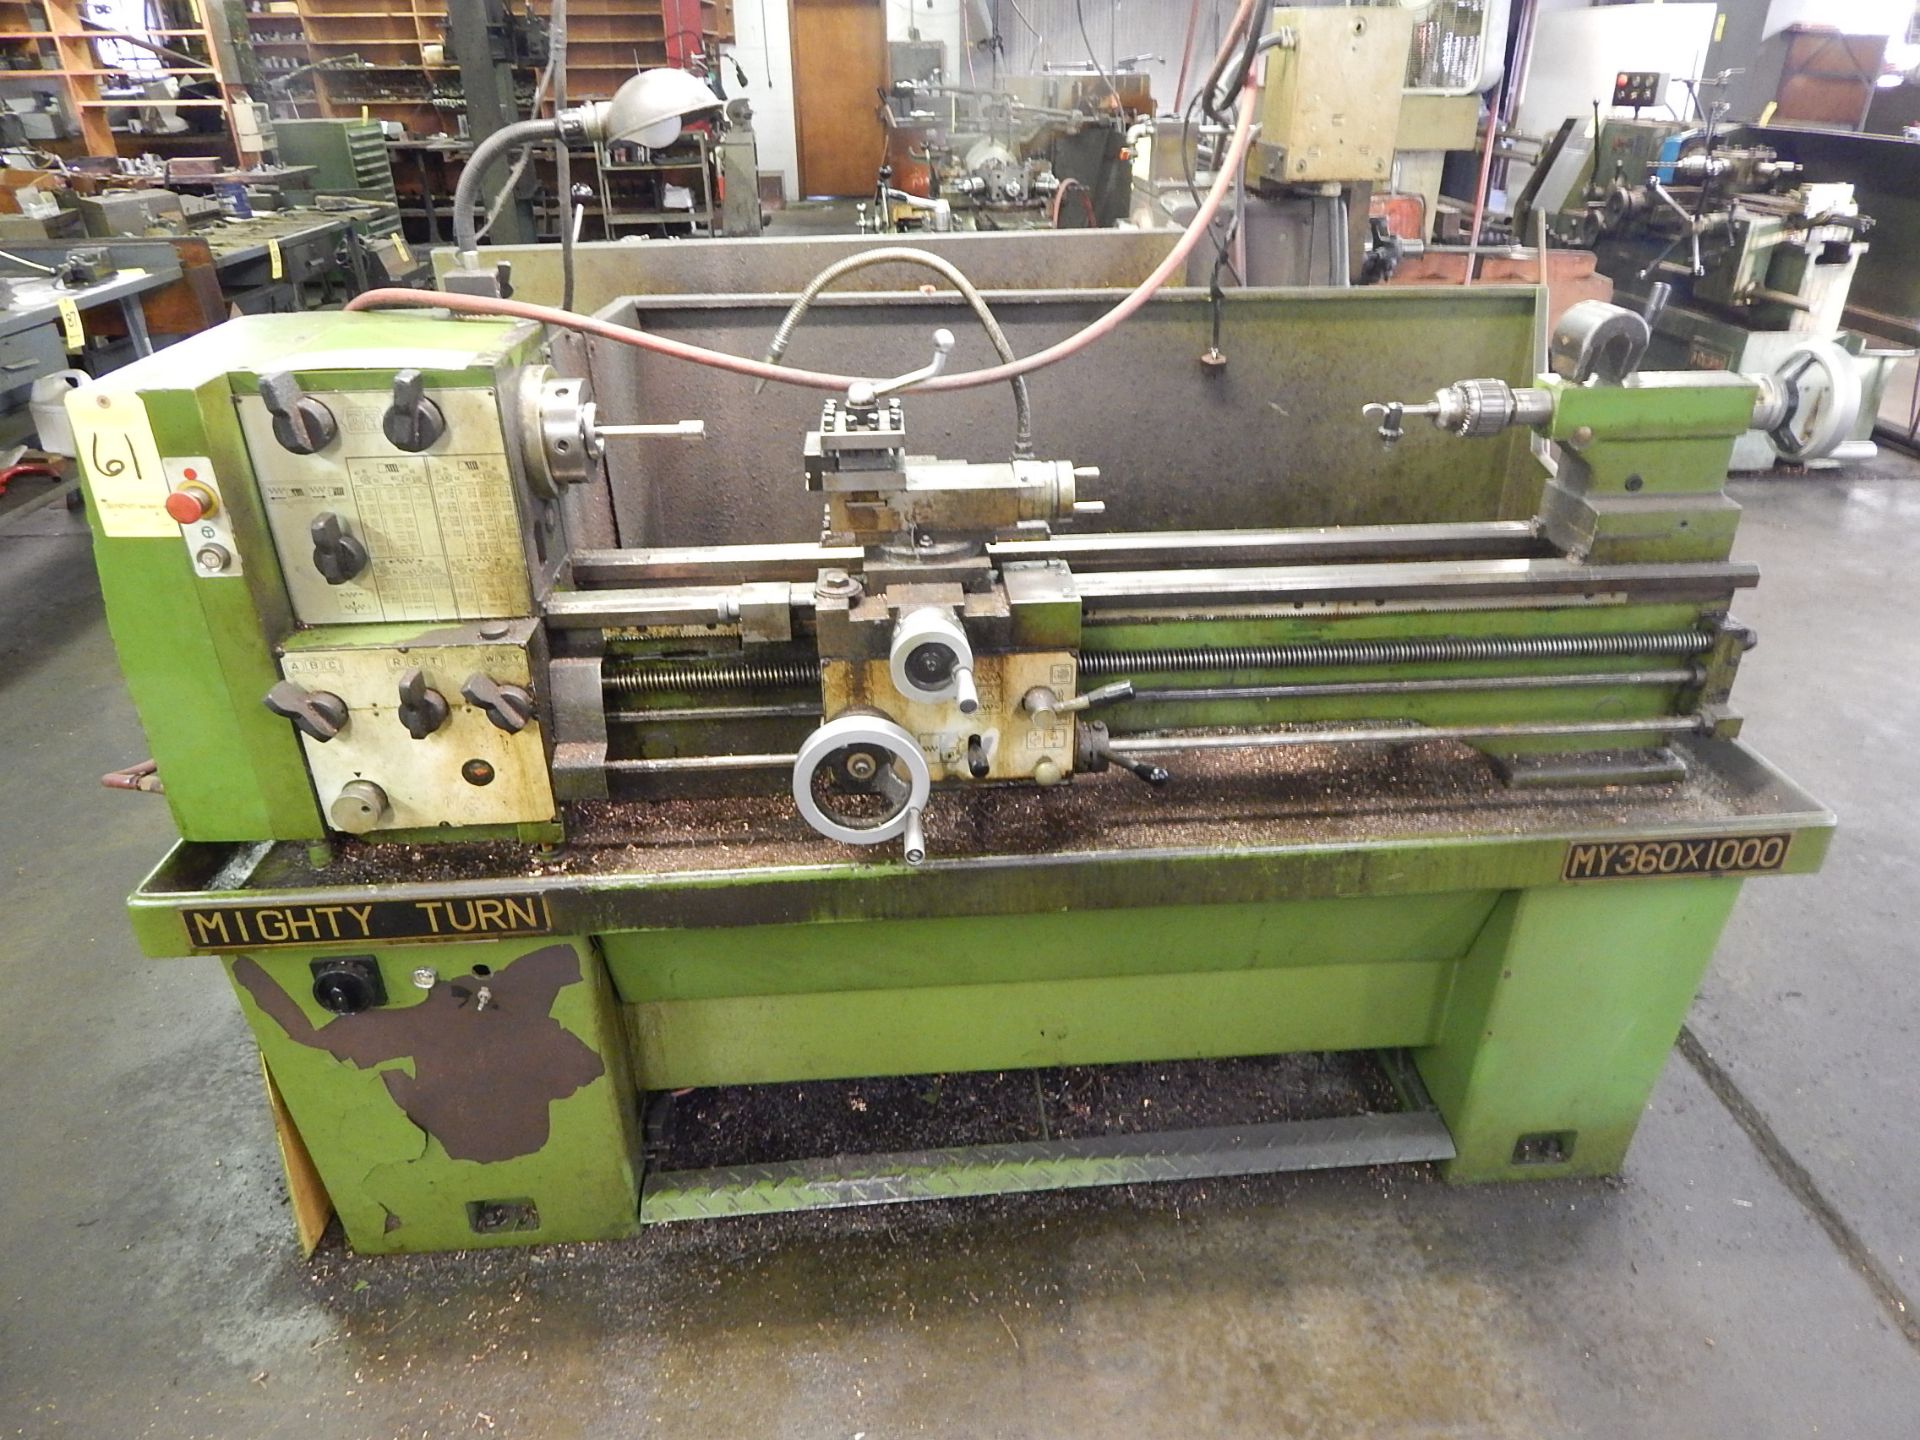 Mighty Turn MY 360 X 1000 Tool Room Lathe, 14" X 40", s/n 22066, 5C Collet Nose, Loading Fee $100.00 - Image 2 of 4